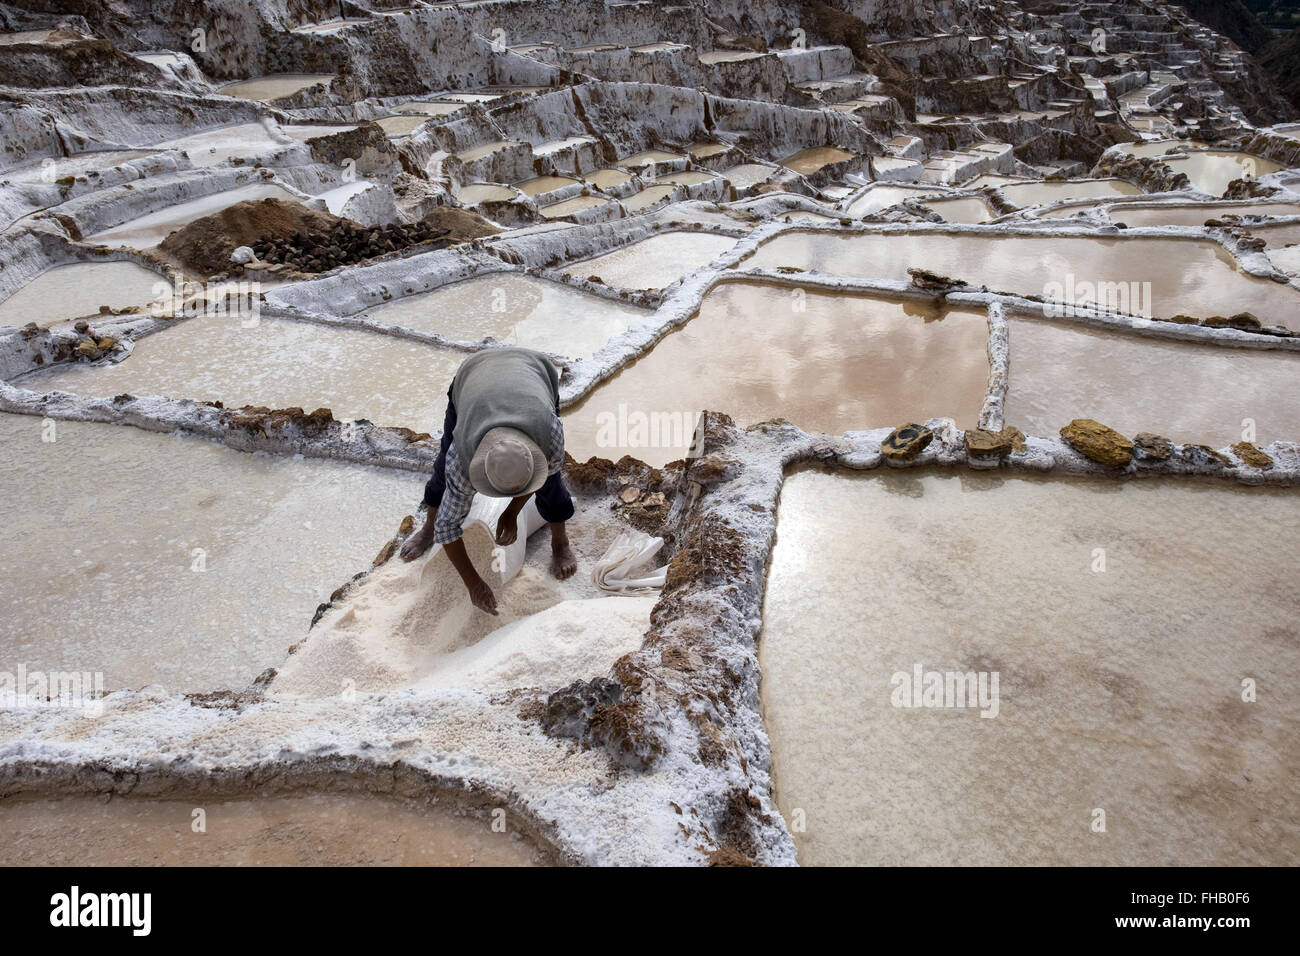 Salt mines of Inca times in Maras community in the Sacred Valley. Stock Photo